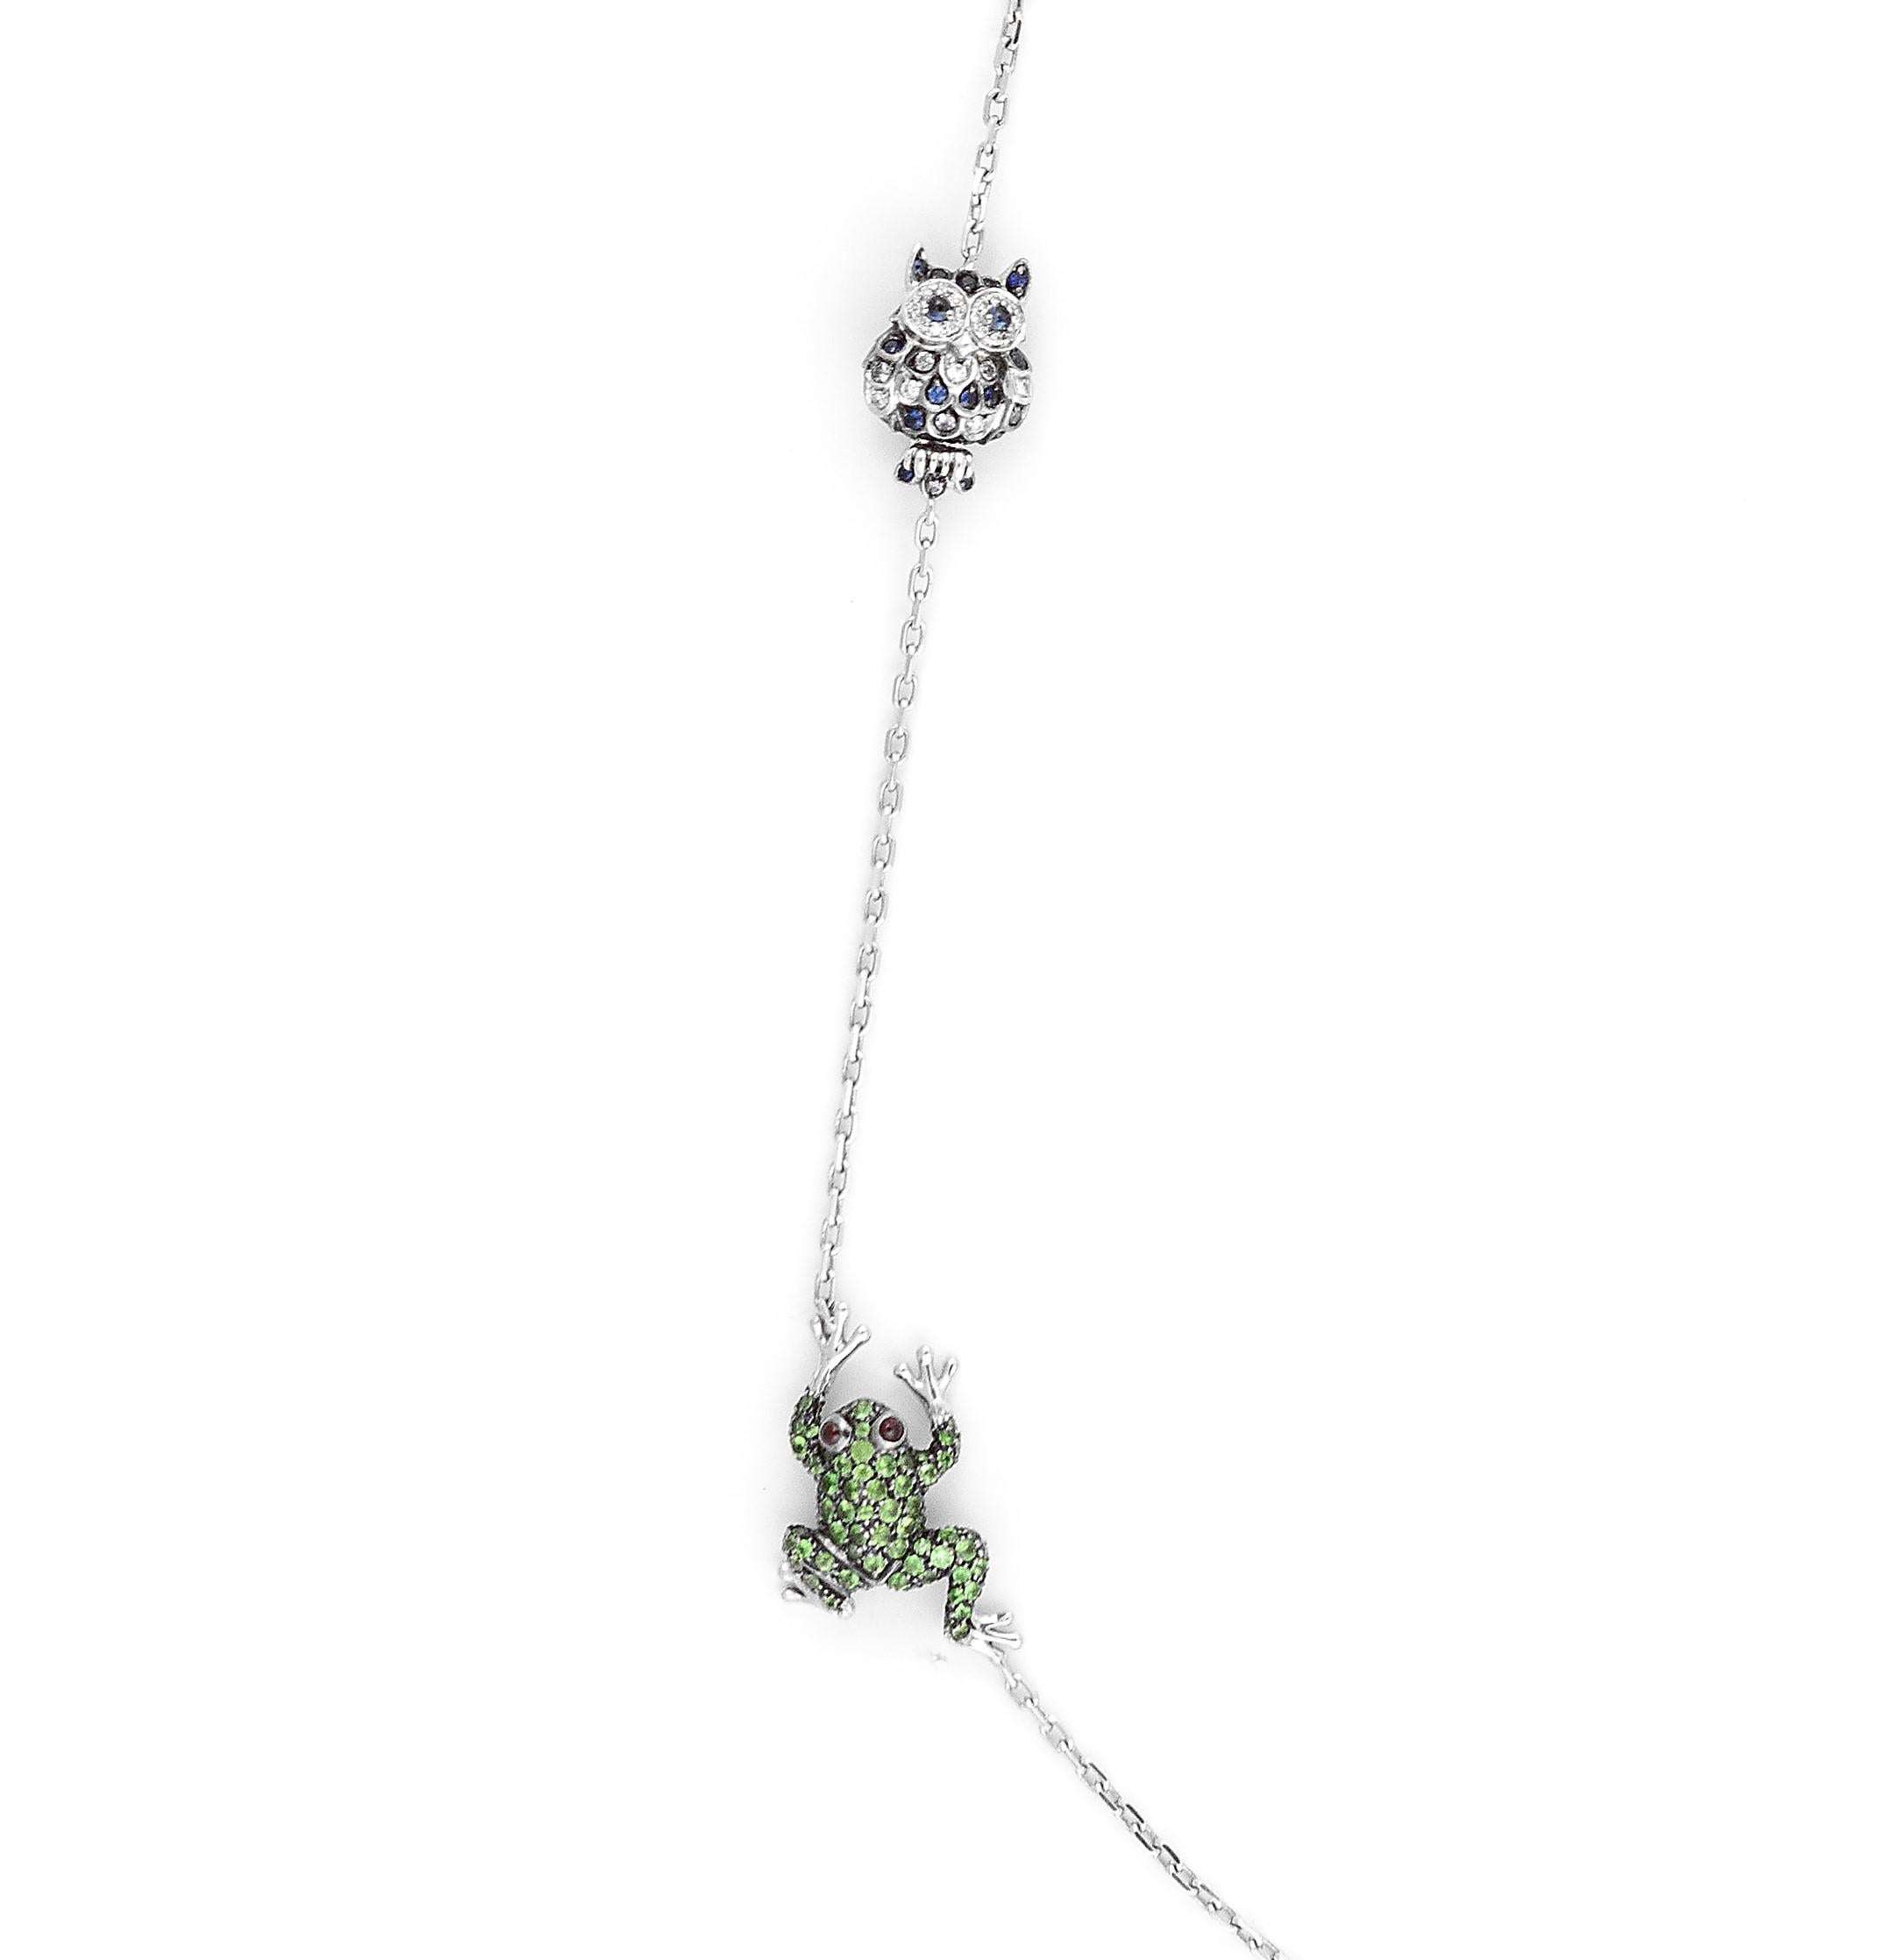 Long Boucheron Animal Necklace 90cm in length. Made with white gold and multicoloured sapphires and diamonds. Original price £48K.